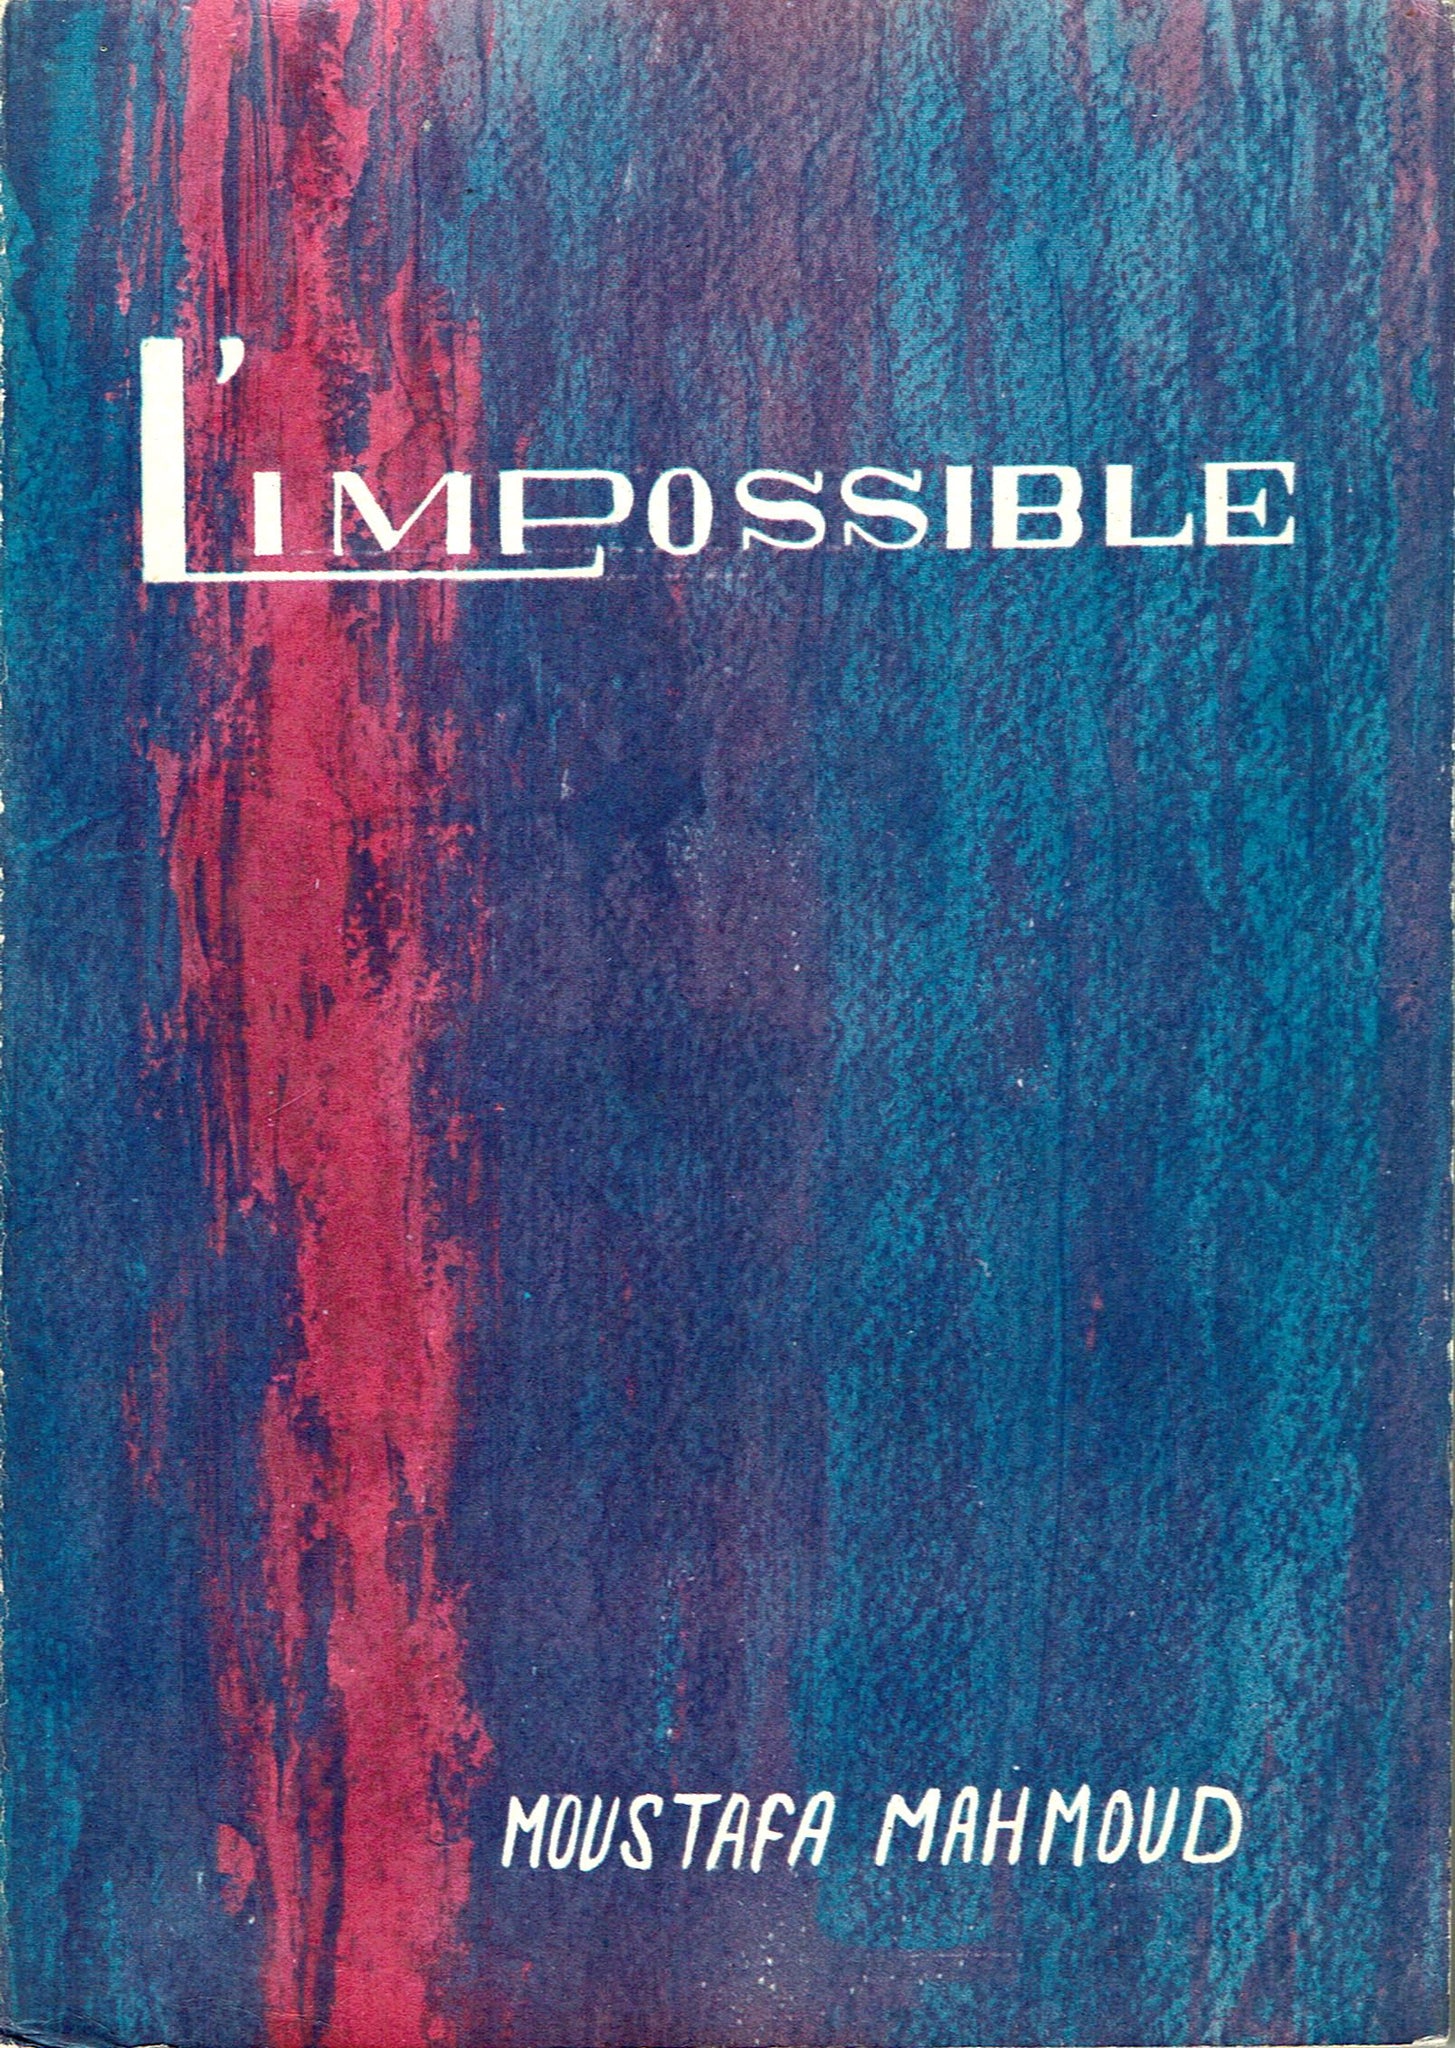 L'Impossible ('The Impossible' French translation)